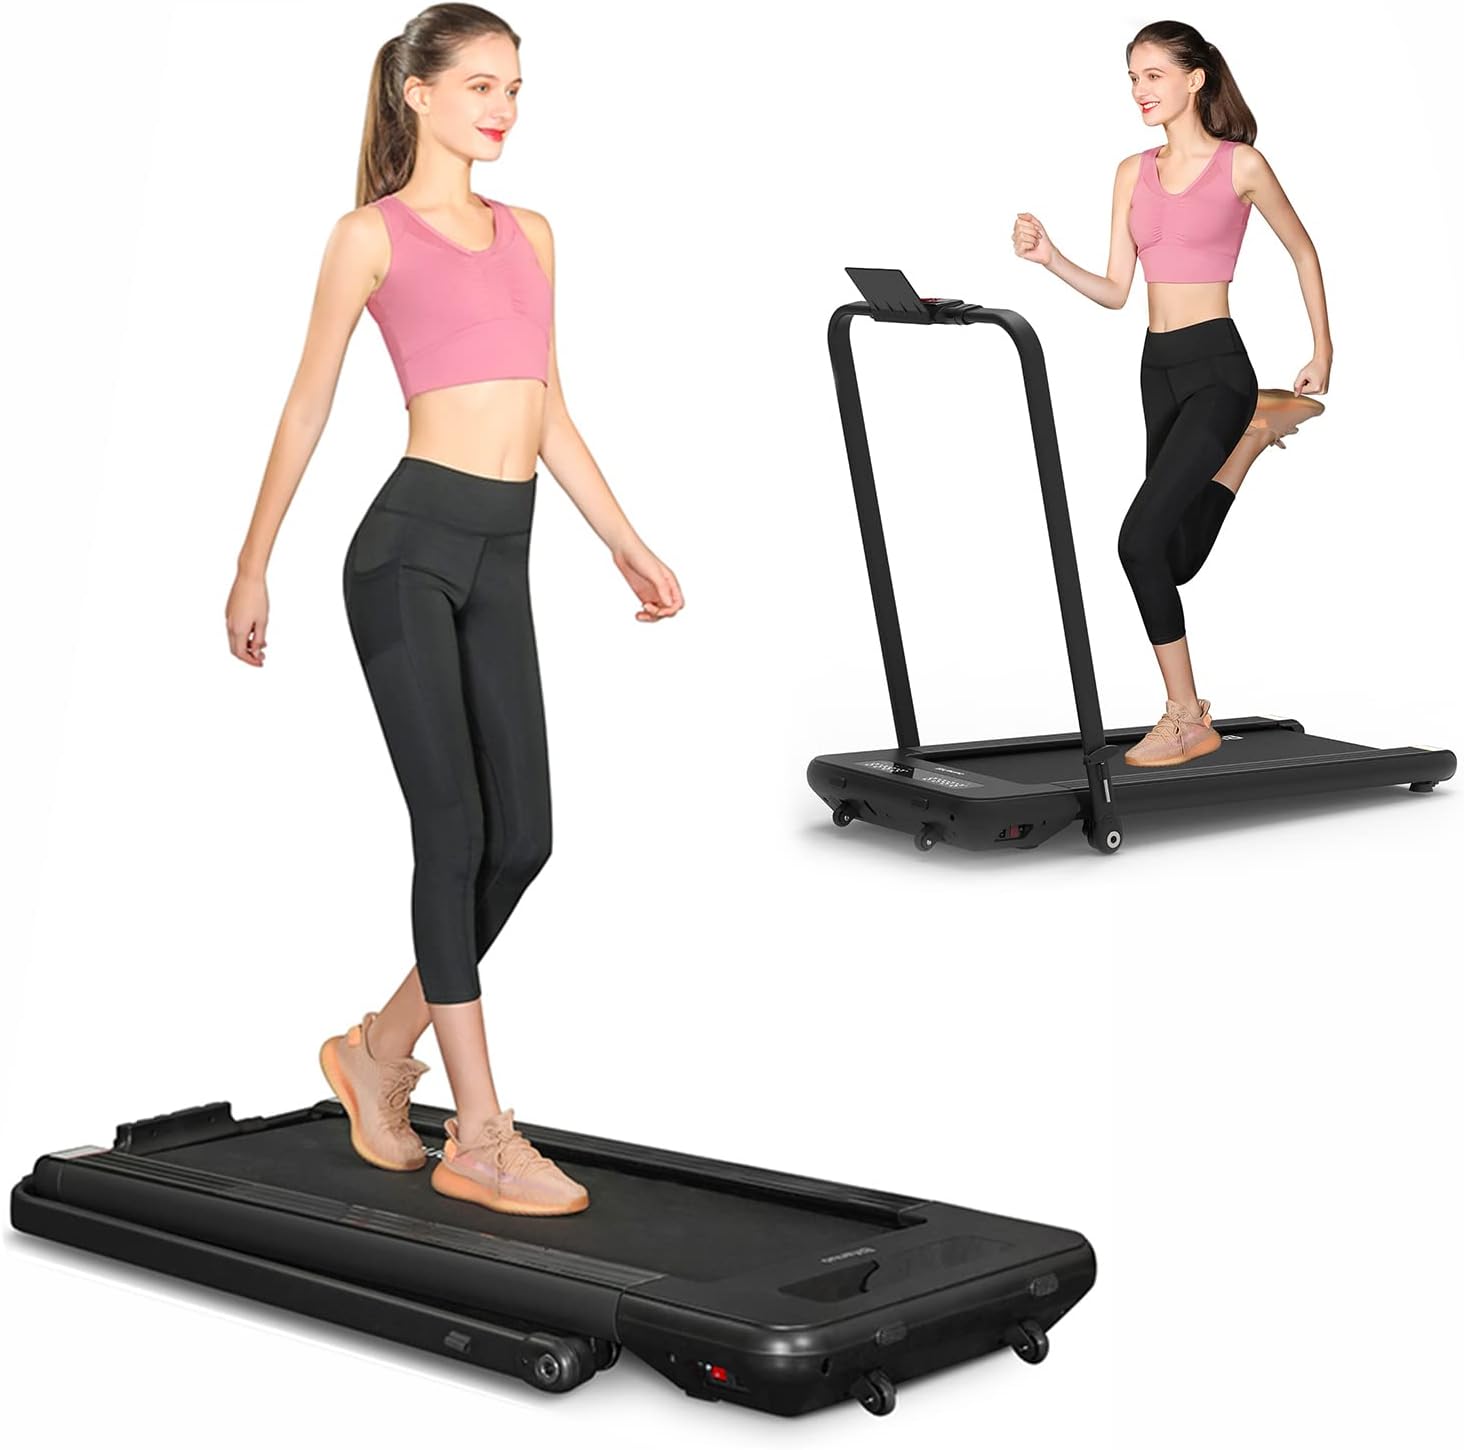 BiFanuo 2 in 1 Folding Treadmill, Under Desk Smart Walking Running Machine, Installation-Free，Compact FoldableTreadmill for Home/Office Gym Cardio Fitness